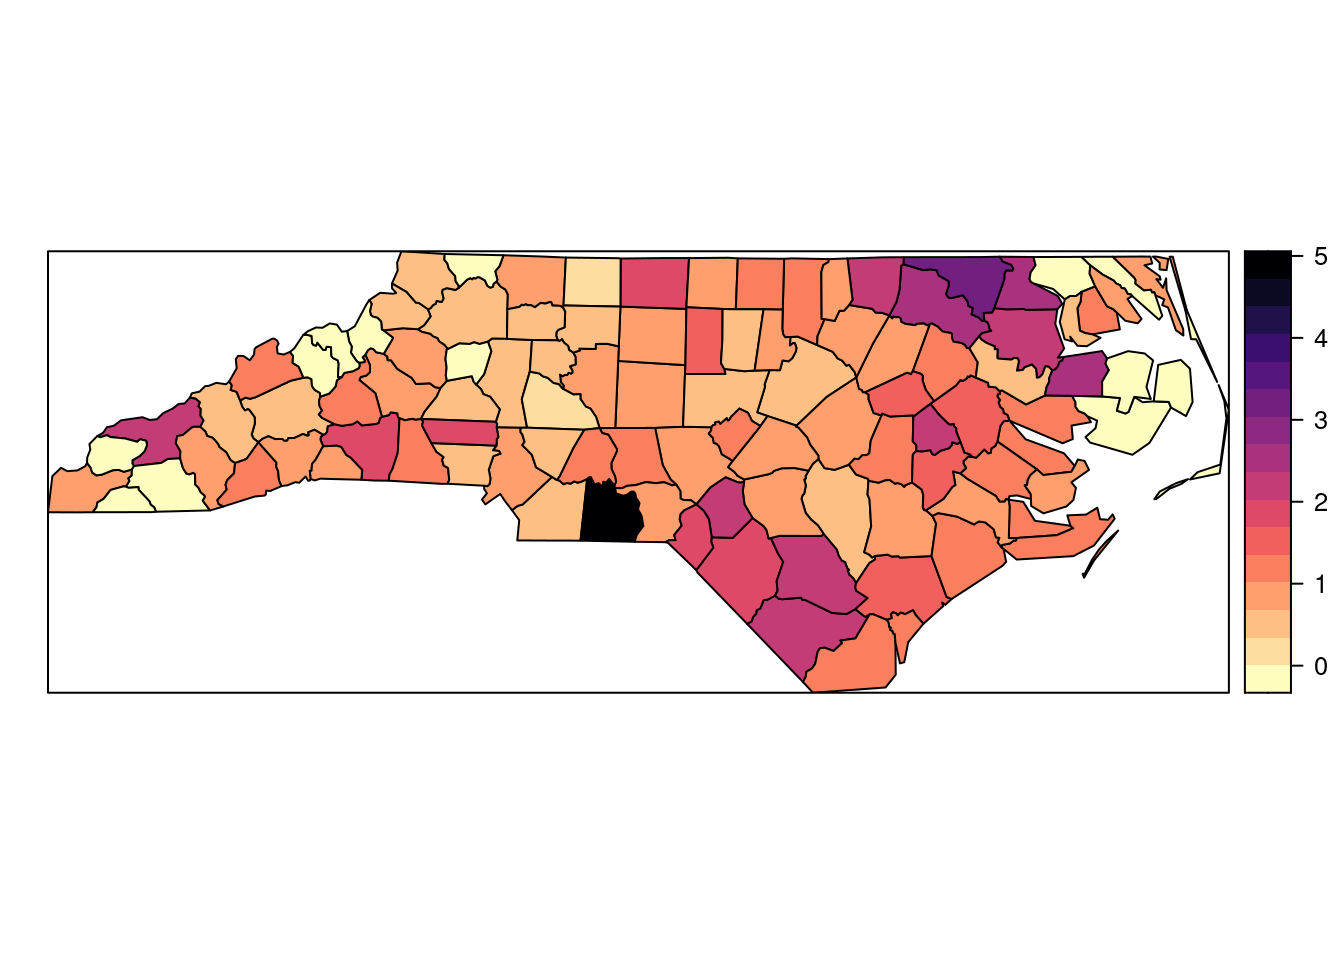 Standardised mortality ratio of the North Carolina SIDS dataset for the period 1971-1974.